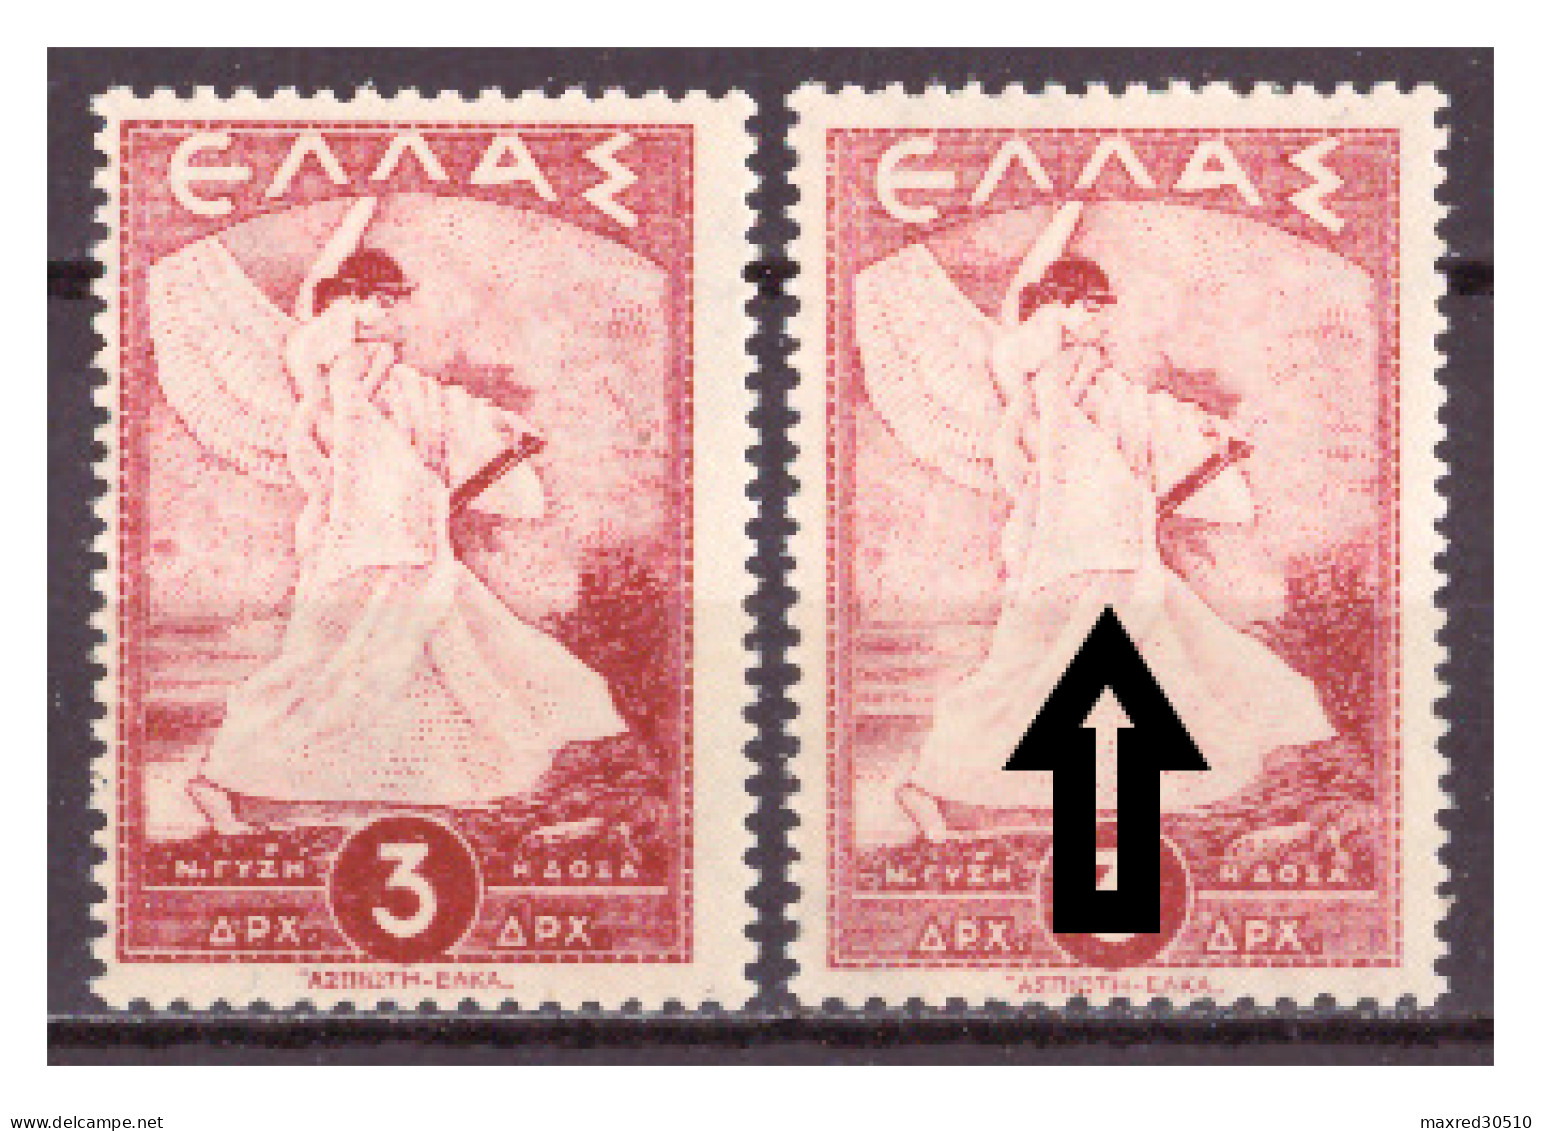 GREECE 1945 2X3L. OF THE "GLORY ISSUE" THE 2ND ONE (SEE ARROWS) WITH MIRROR PRINTING AT THE GUM ERROR MNH - Abarten Und Kuriositäten